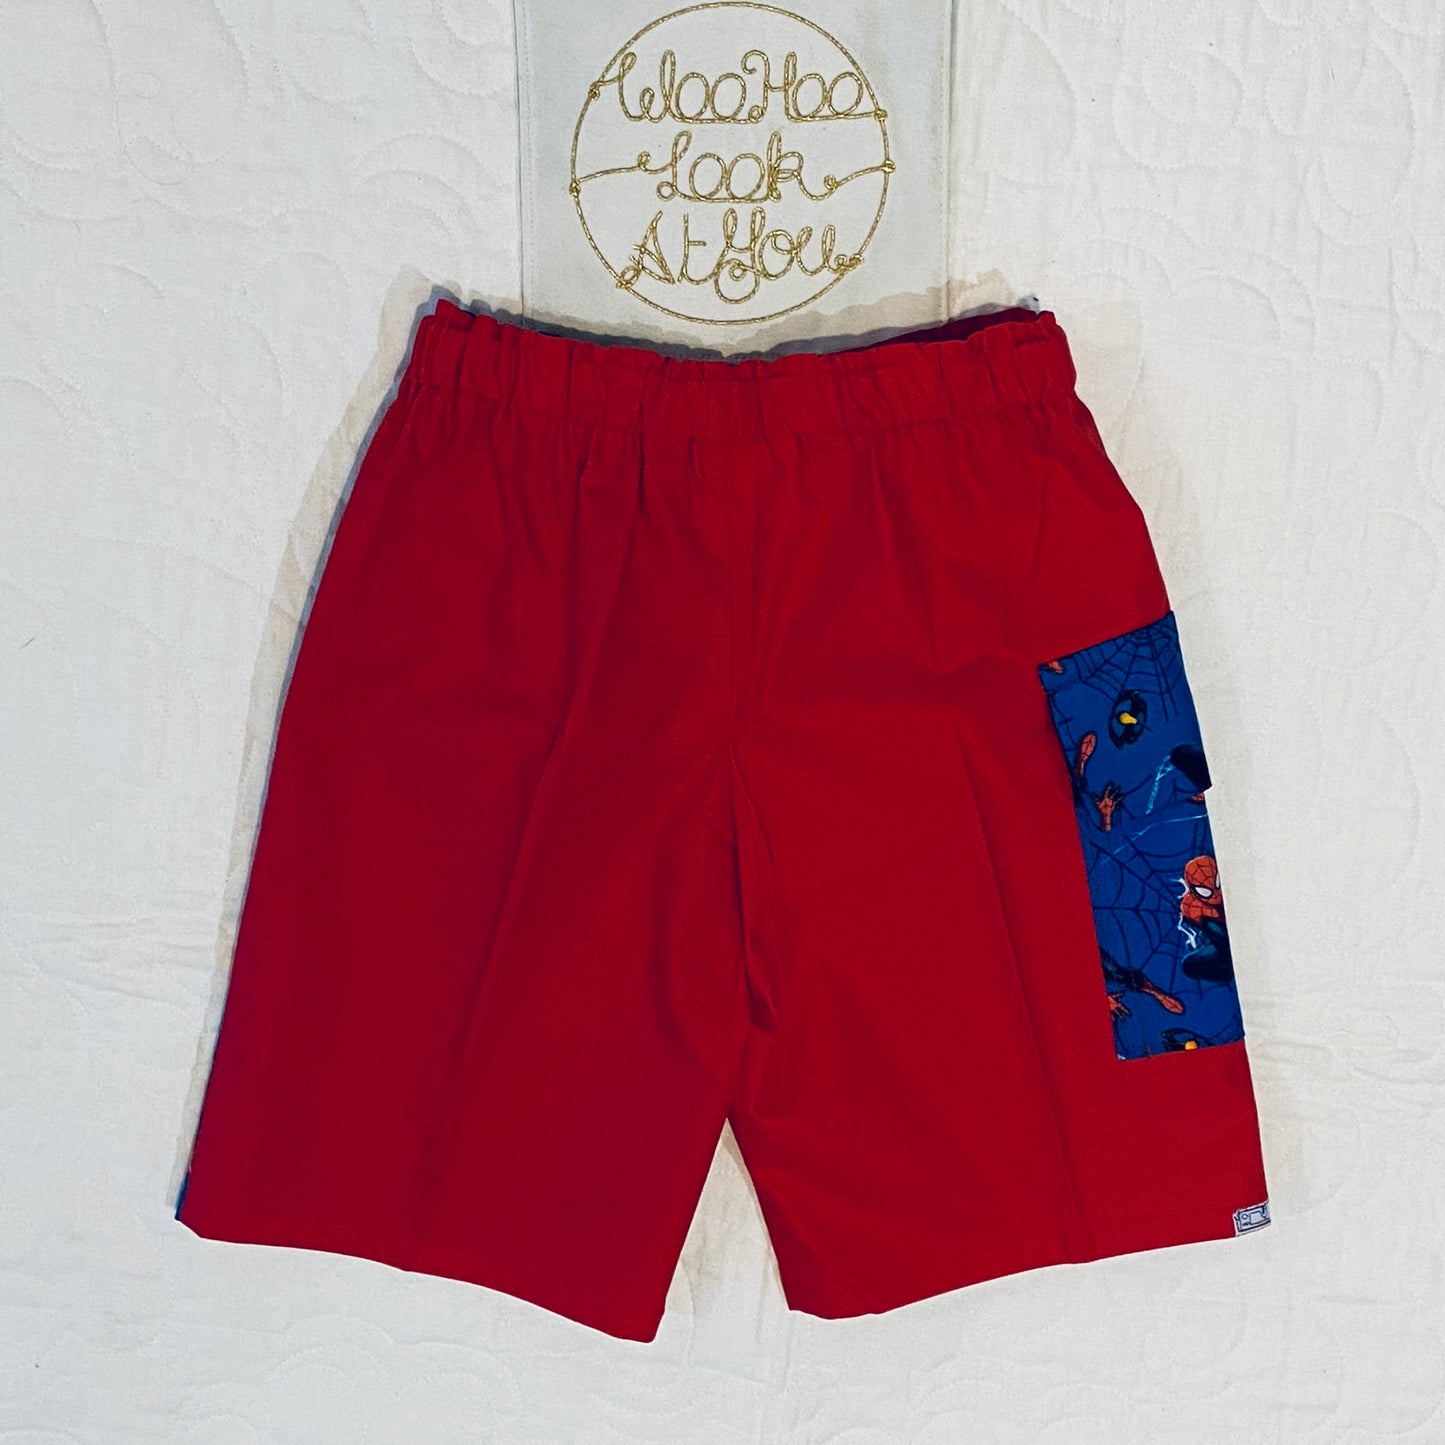 Pants - Cargo Shorts - Red with Action Figures, Flap Pocket for Rocks, Elastic Waist